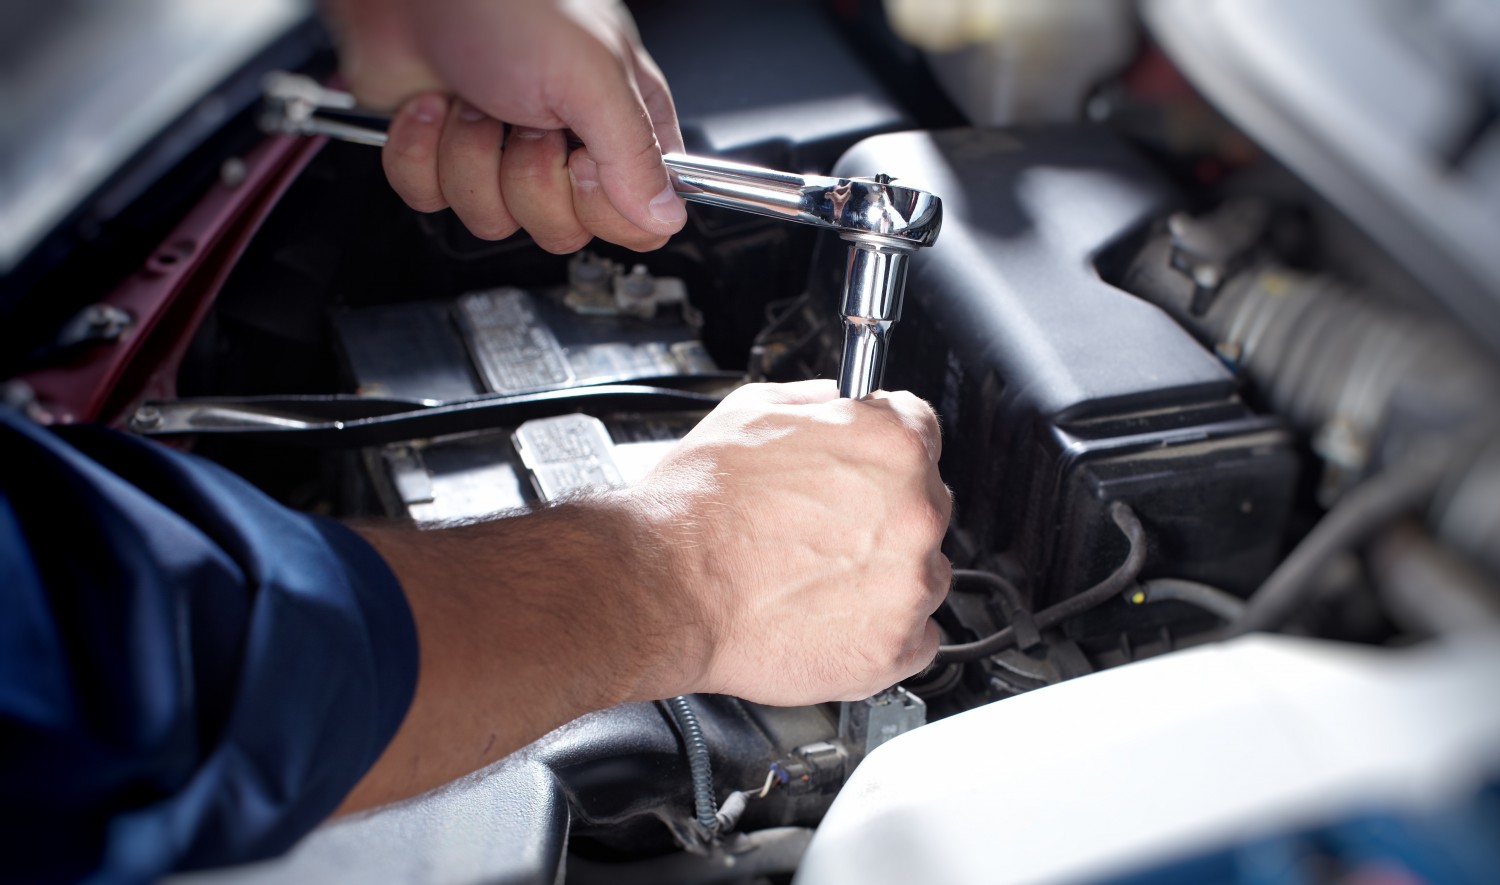 Doorstep Car Repair Services Saves Your Day